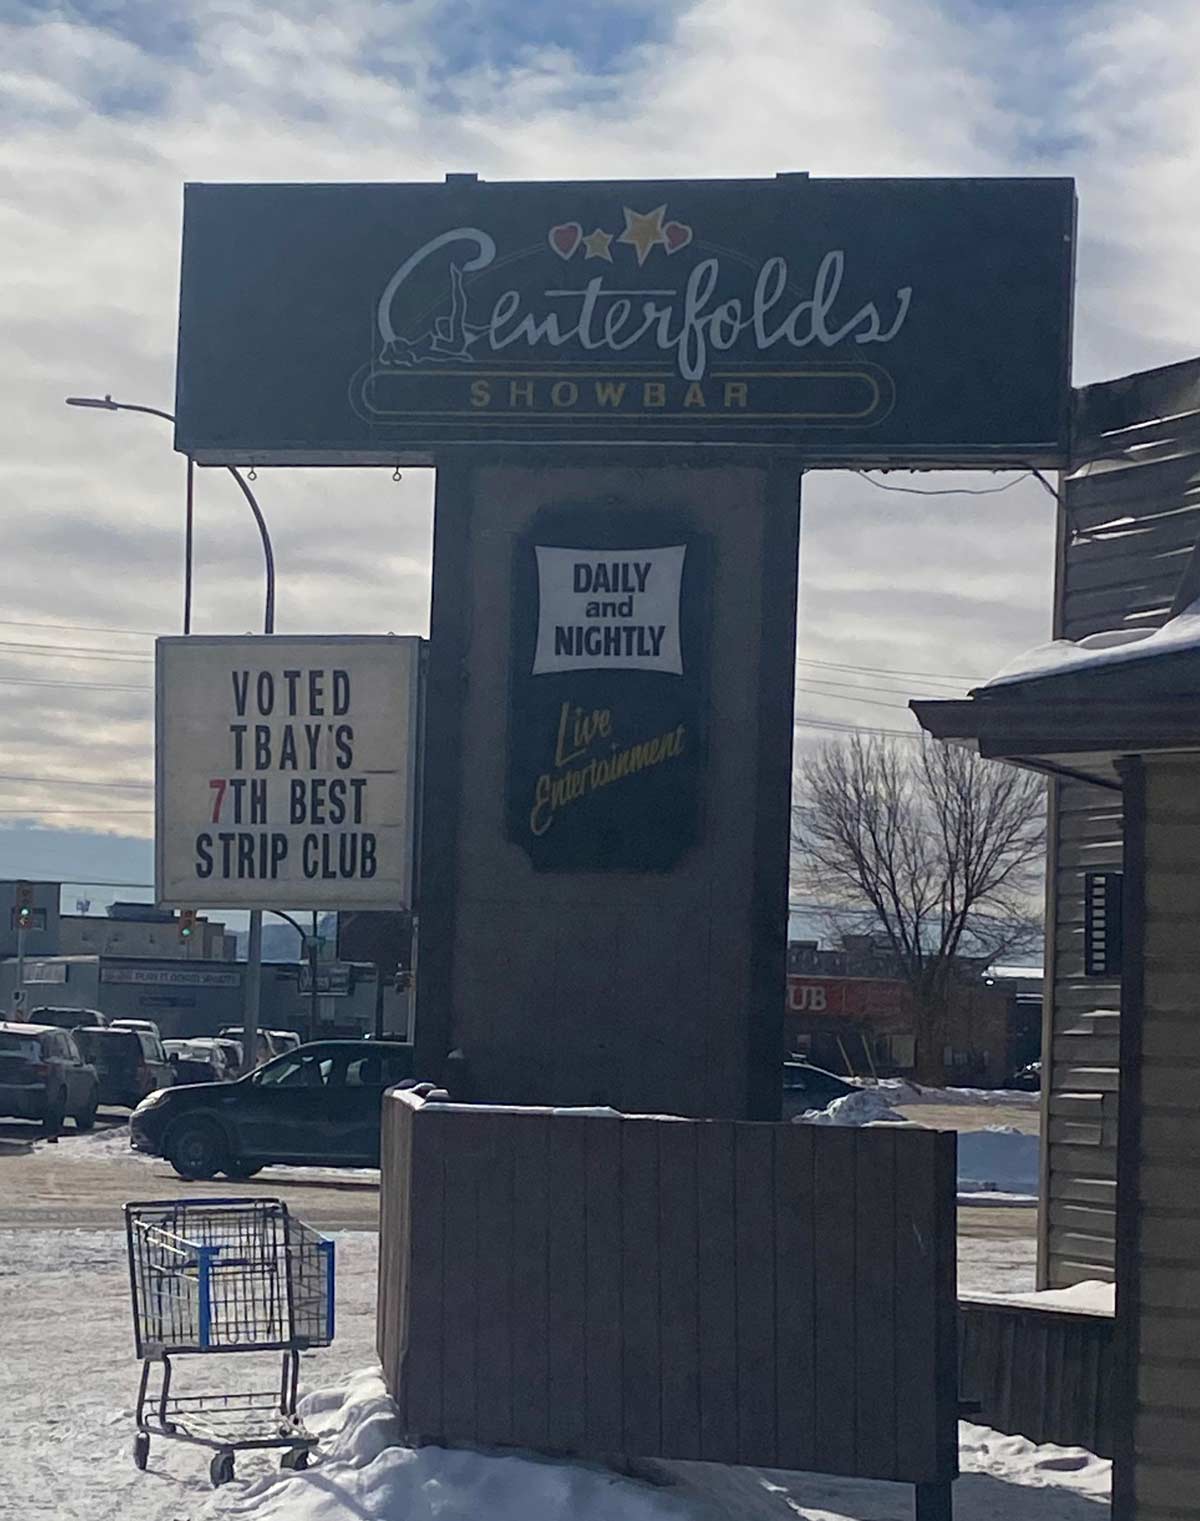 Our only strip club in town